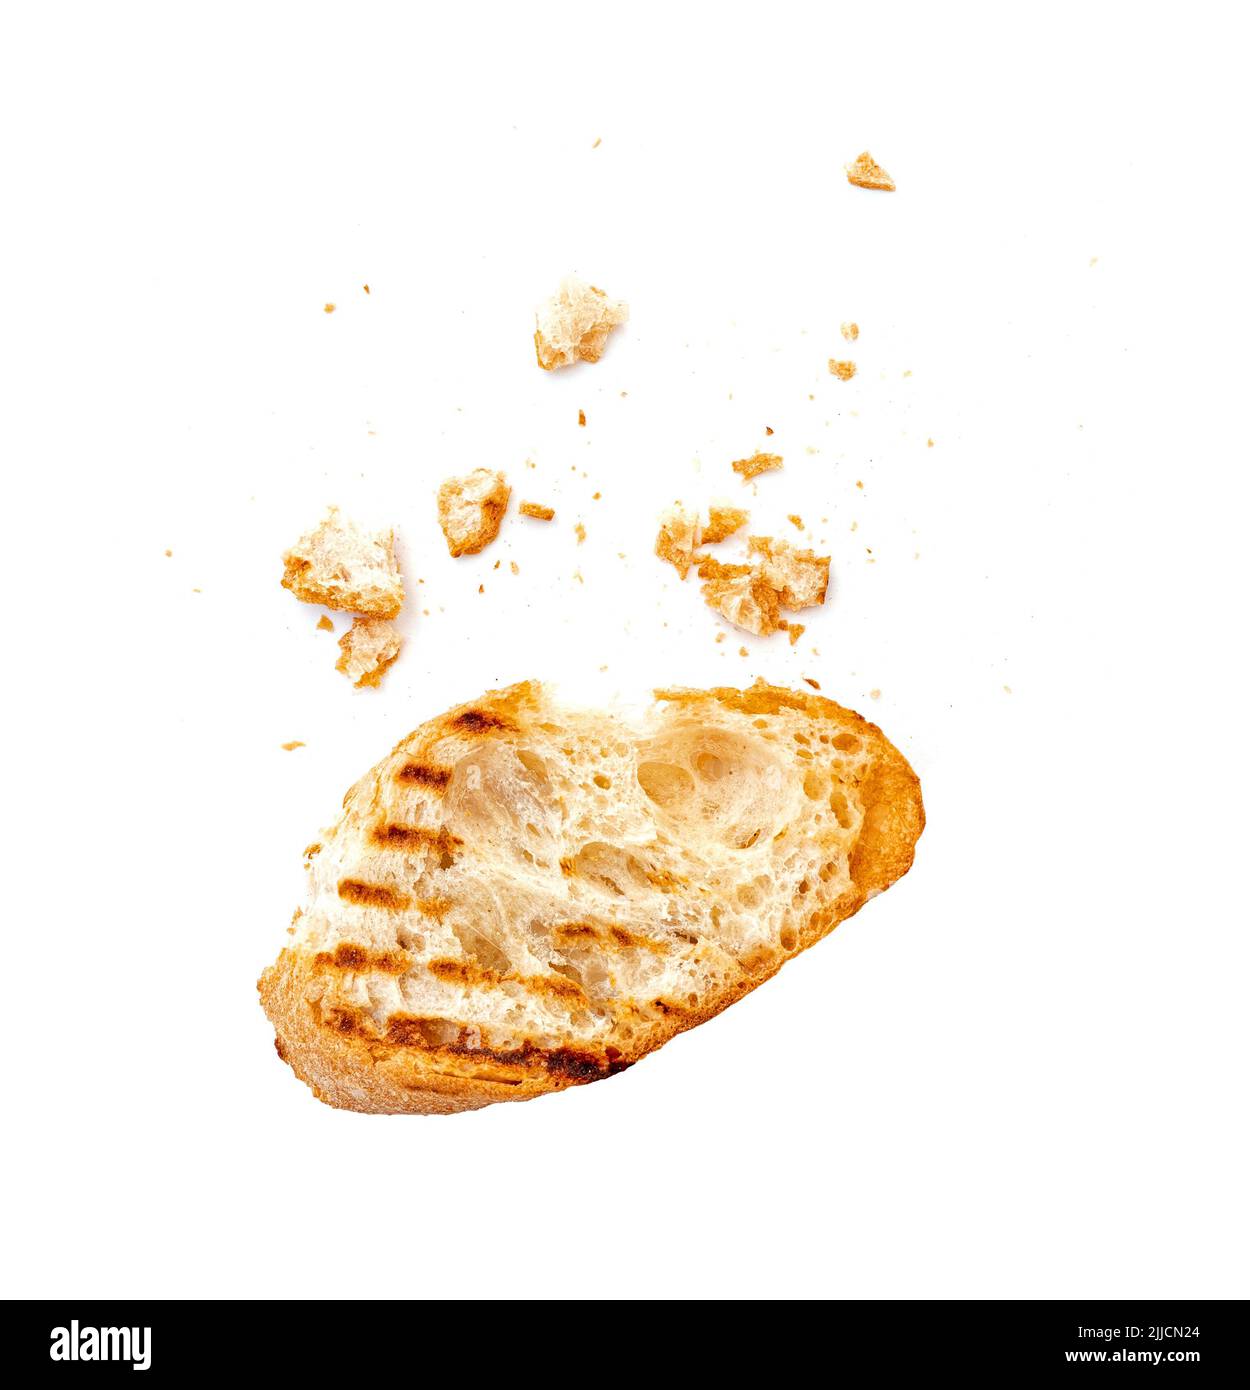 Piece of a dry white bread bruschetta or baguette with crumbs isolated on white Stock Photo